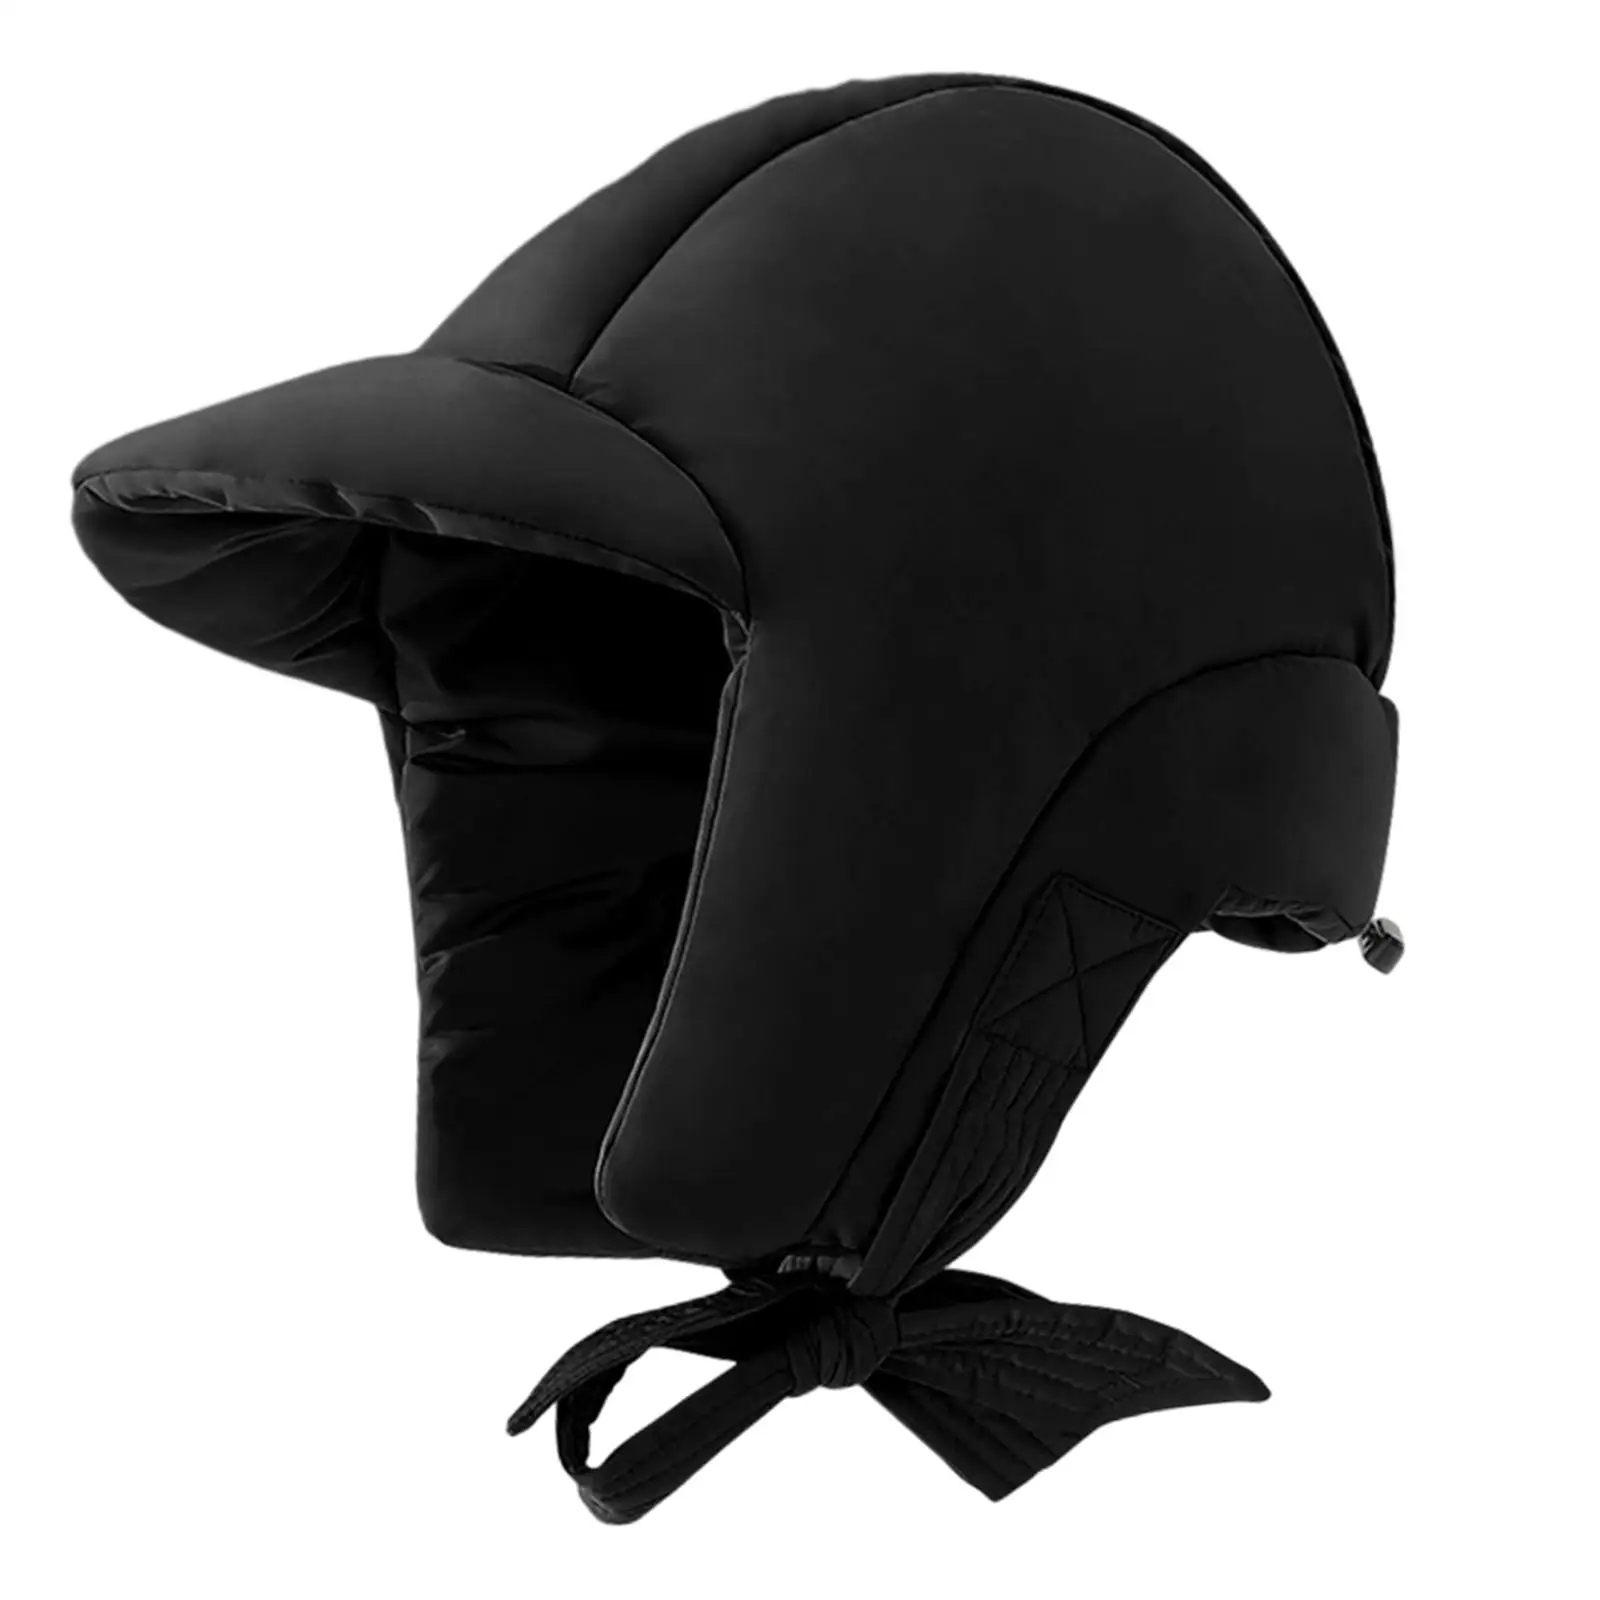 Down Hat with Earflaps Comfortable Baseball Cap for Women Warm Hat with Visor for Skiing Biking Cold Weather Camping Skating